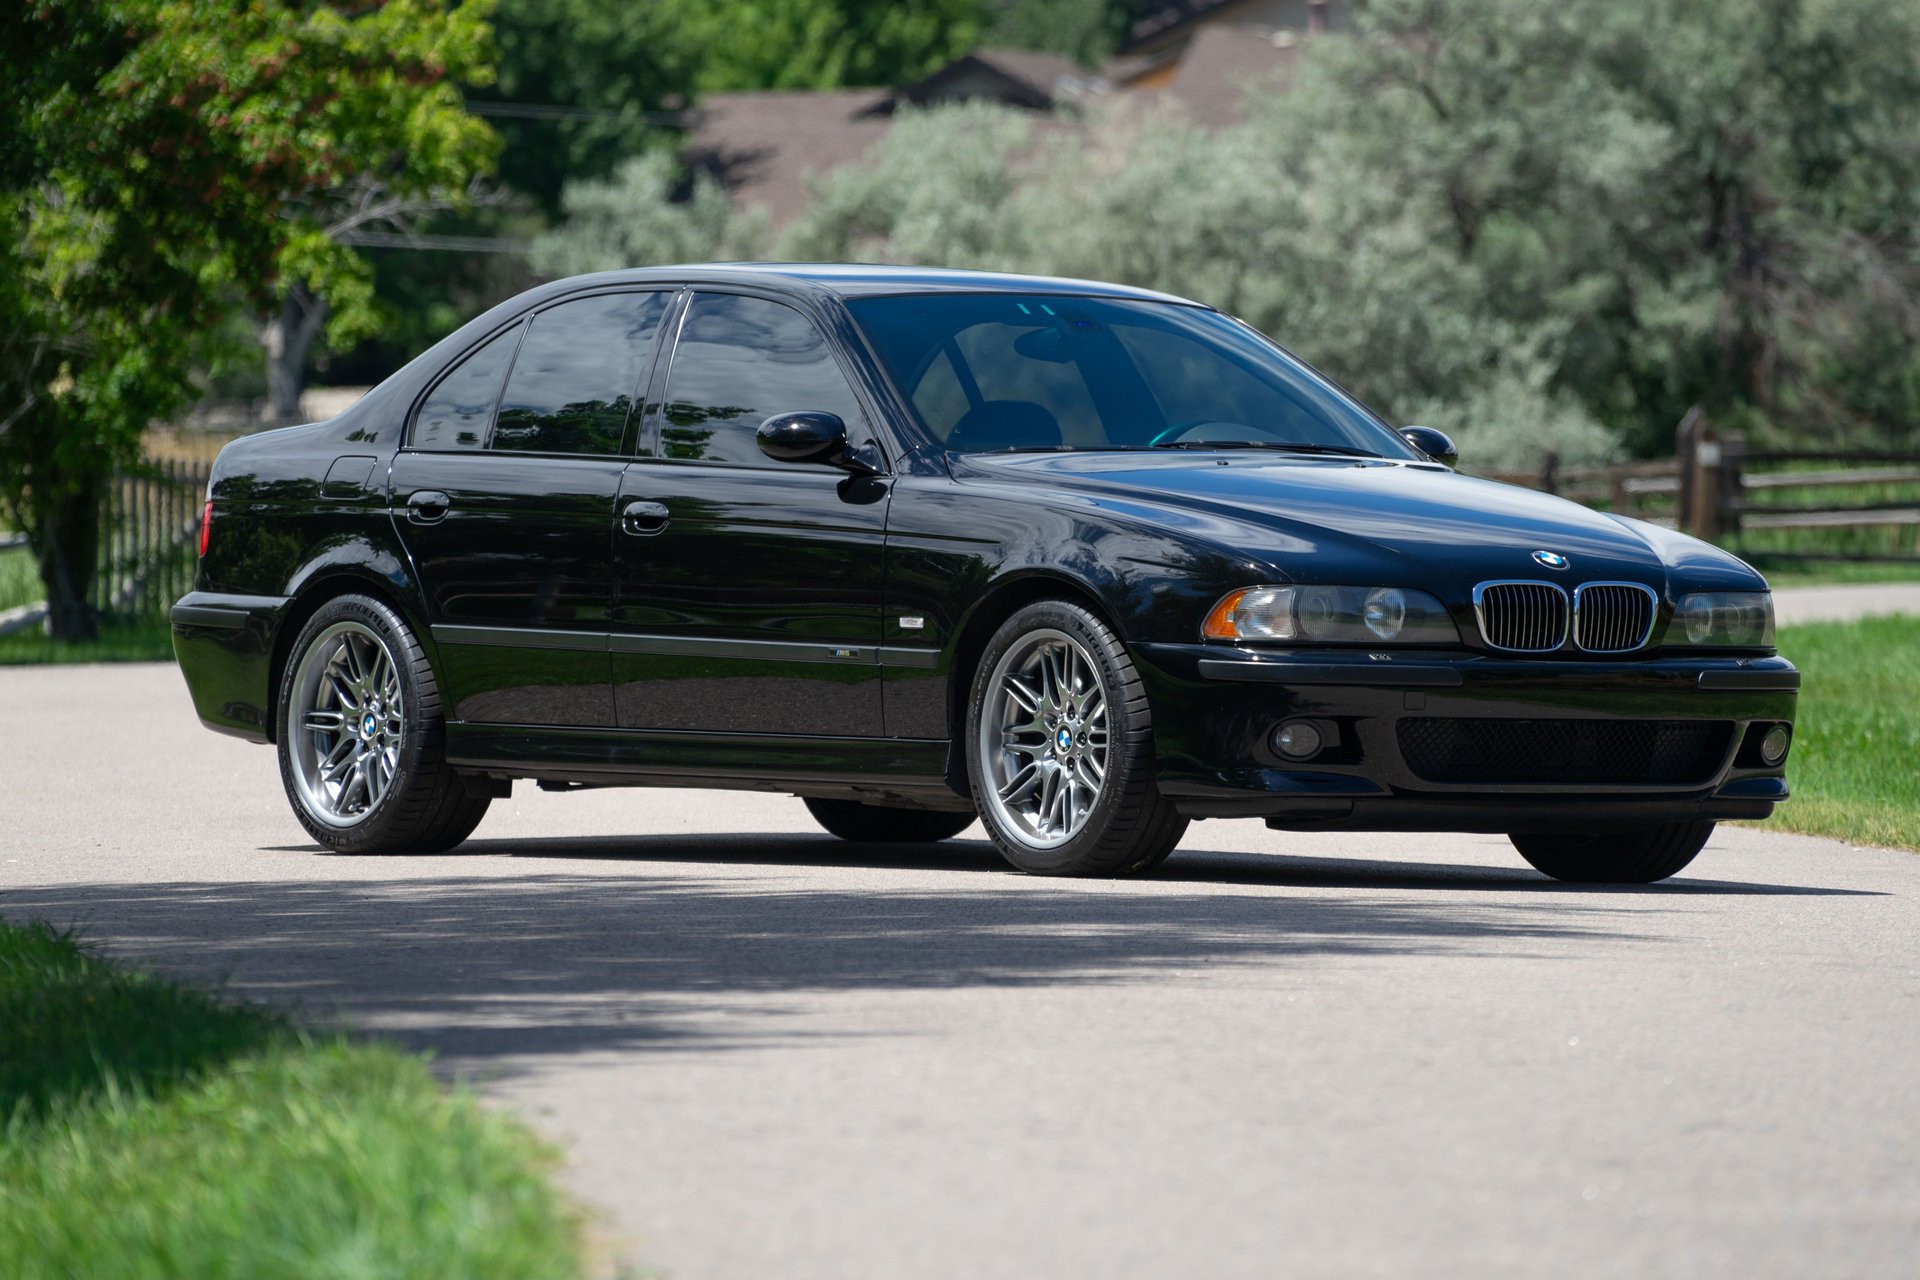 2000 BMW M5 owner review